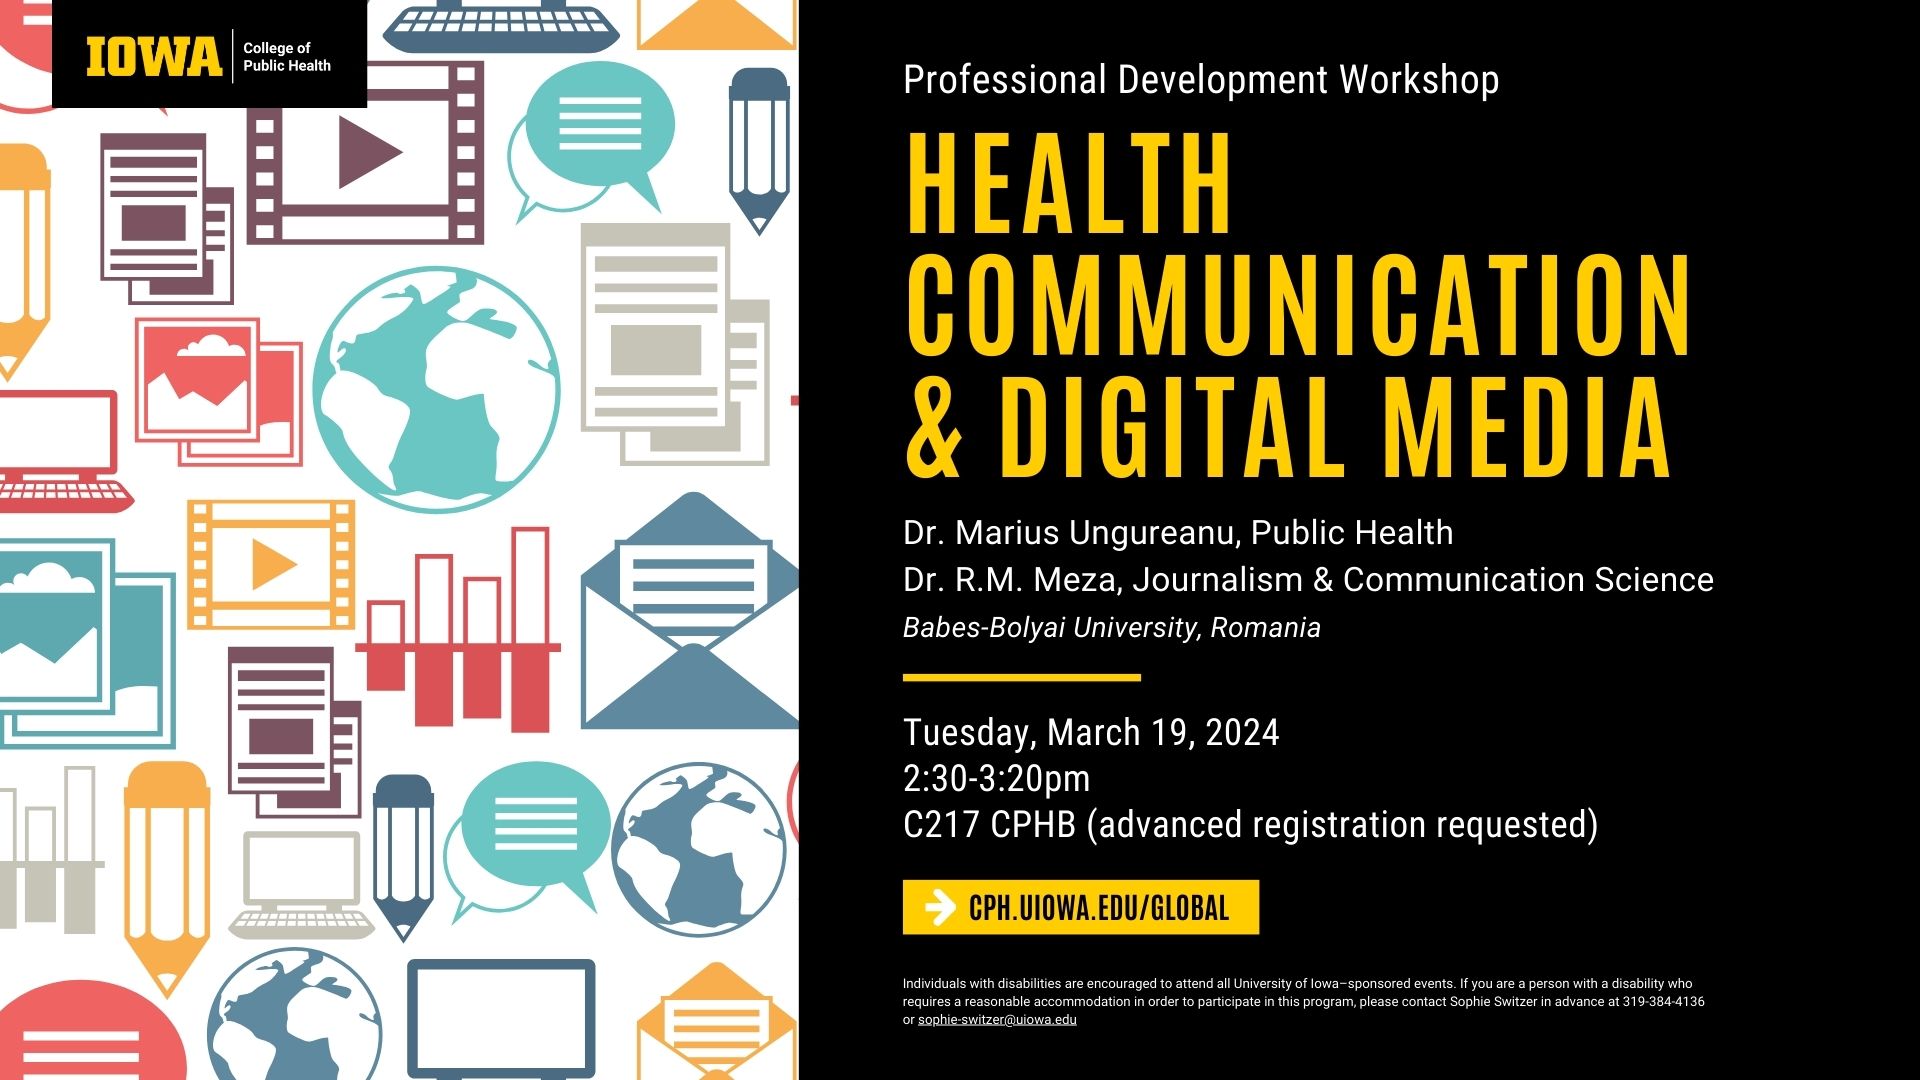 Health Communication and Digital Media workshop is March 19 from 2:30 to 3:20 in C217 CPHB